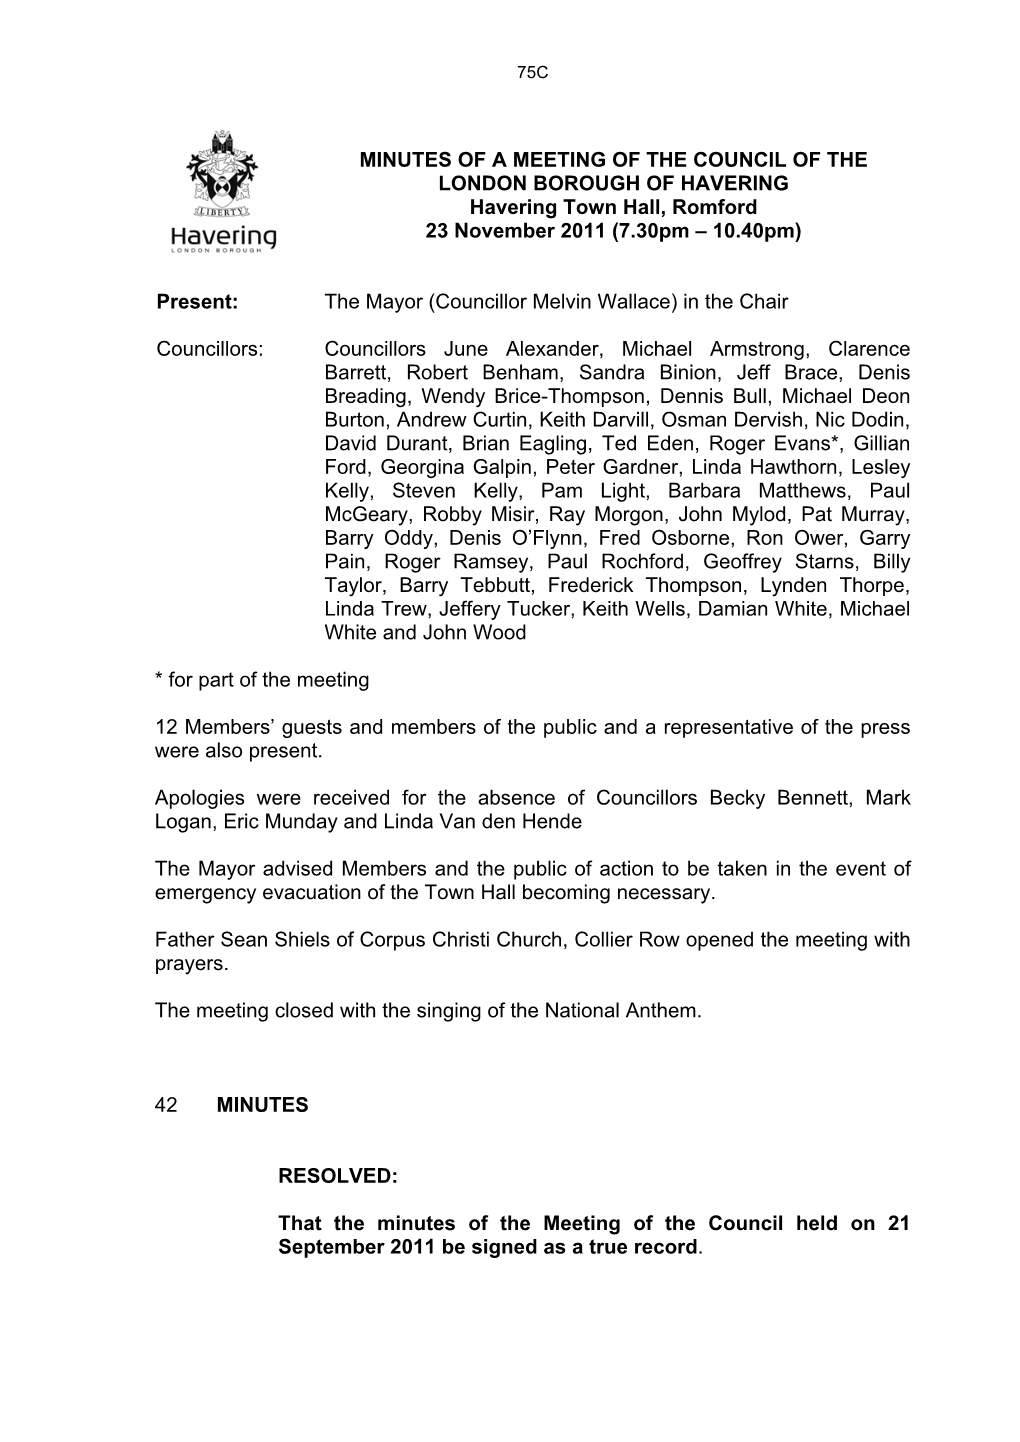 MINUTES of a MEETING of the COUNCIL of the LONDON BOROUGH of HAVERING Havering Town Hall, Romford 23 November 2011 (7.30Pm – 10.40Pm)